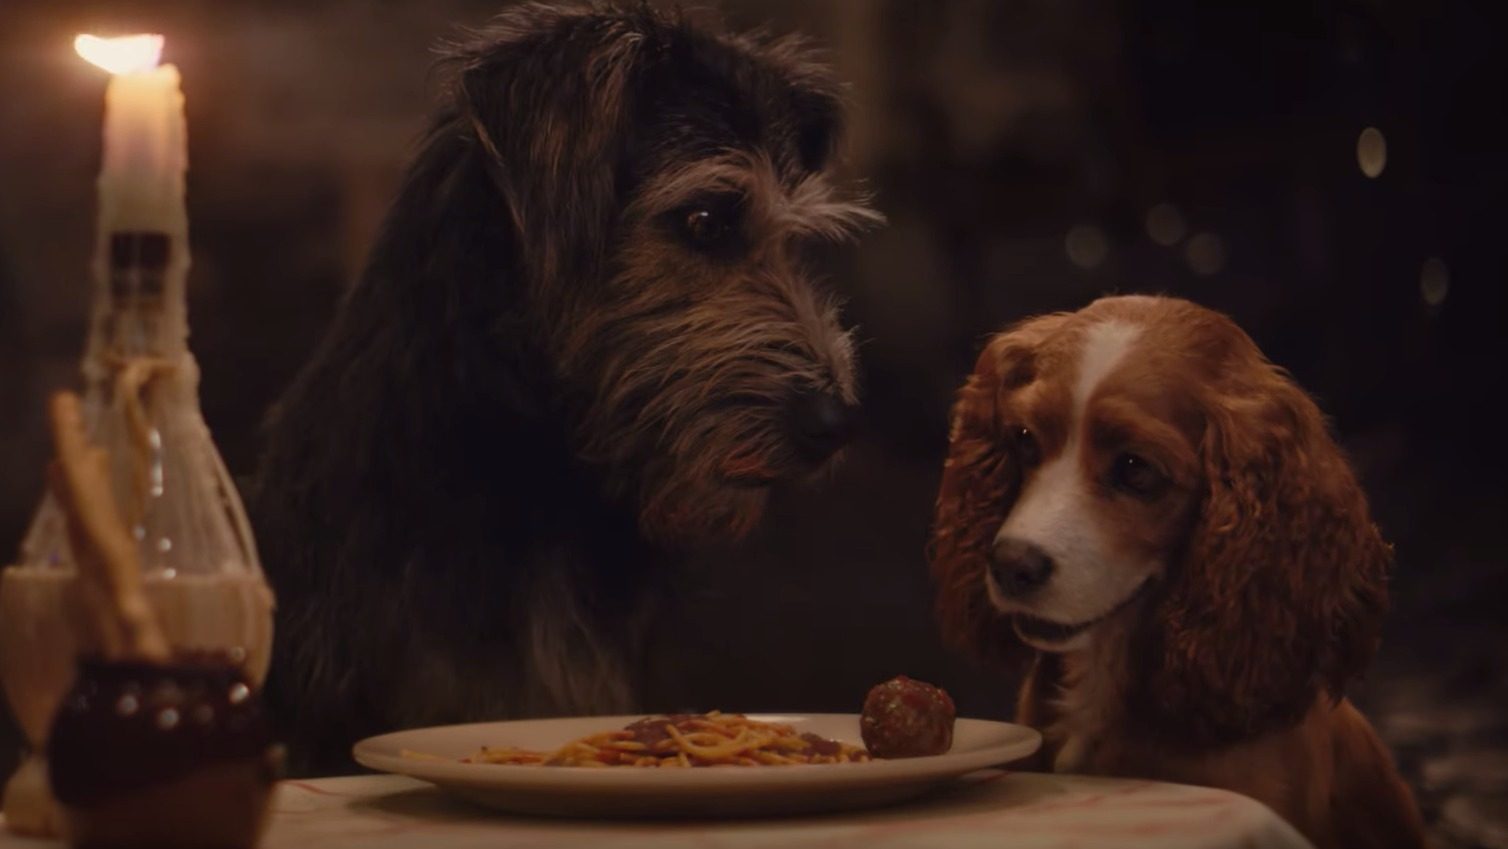 WATCH: A new trailer for ‘Lady and the Tramp’ remake is out